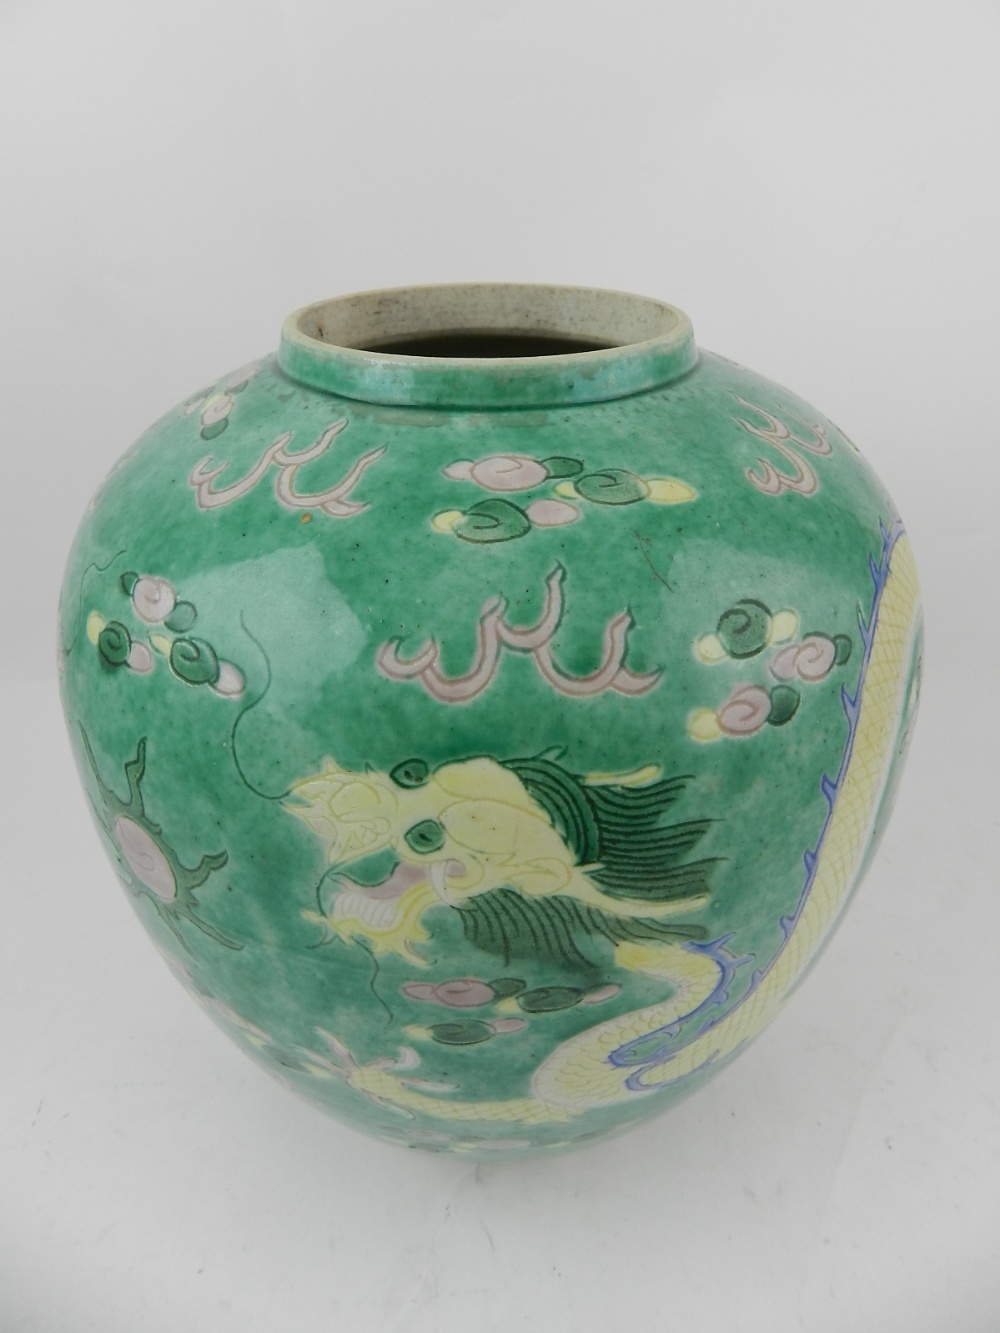 A 19th century Chinese hard paste porcelain vase, decorated on a green ground with dragons chasing